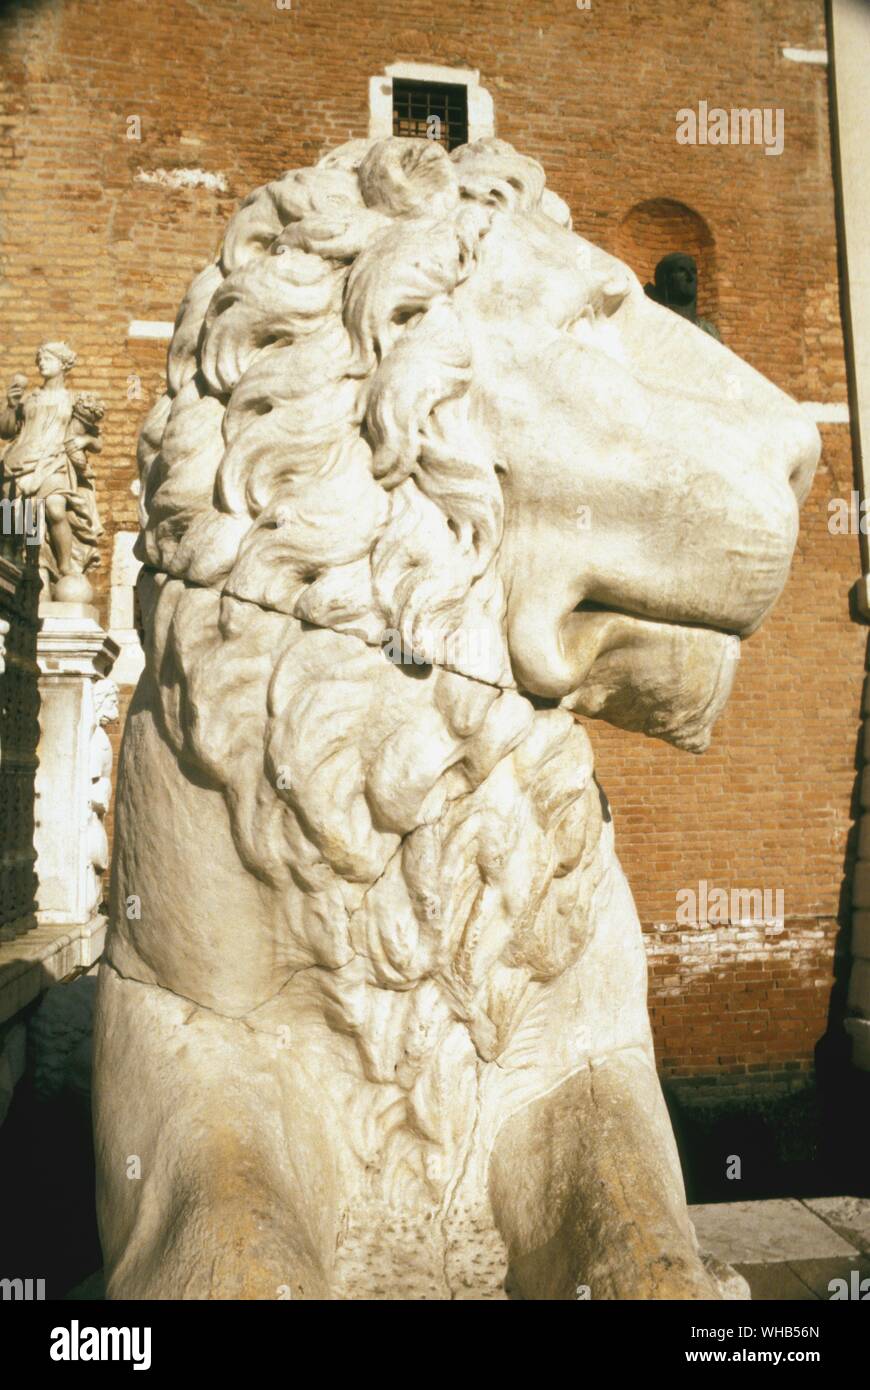 One of the stone lions at the Venetial Arsenal. The lions on each side of the entrance, a triumphal arch in the Renaissance style, came from Greece, booty brought back by Francesco Morosoni in the 17th century. Of the two lions, the larger one stood guard over the port of Piraeus while its fellow stood on the road from Athens to Eleusis.. Stock Photo